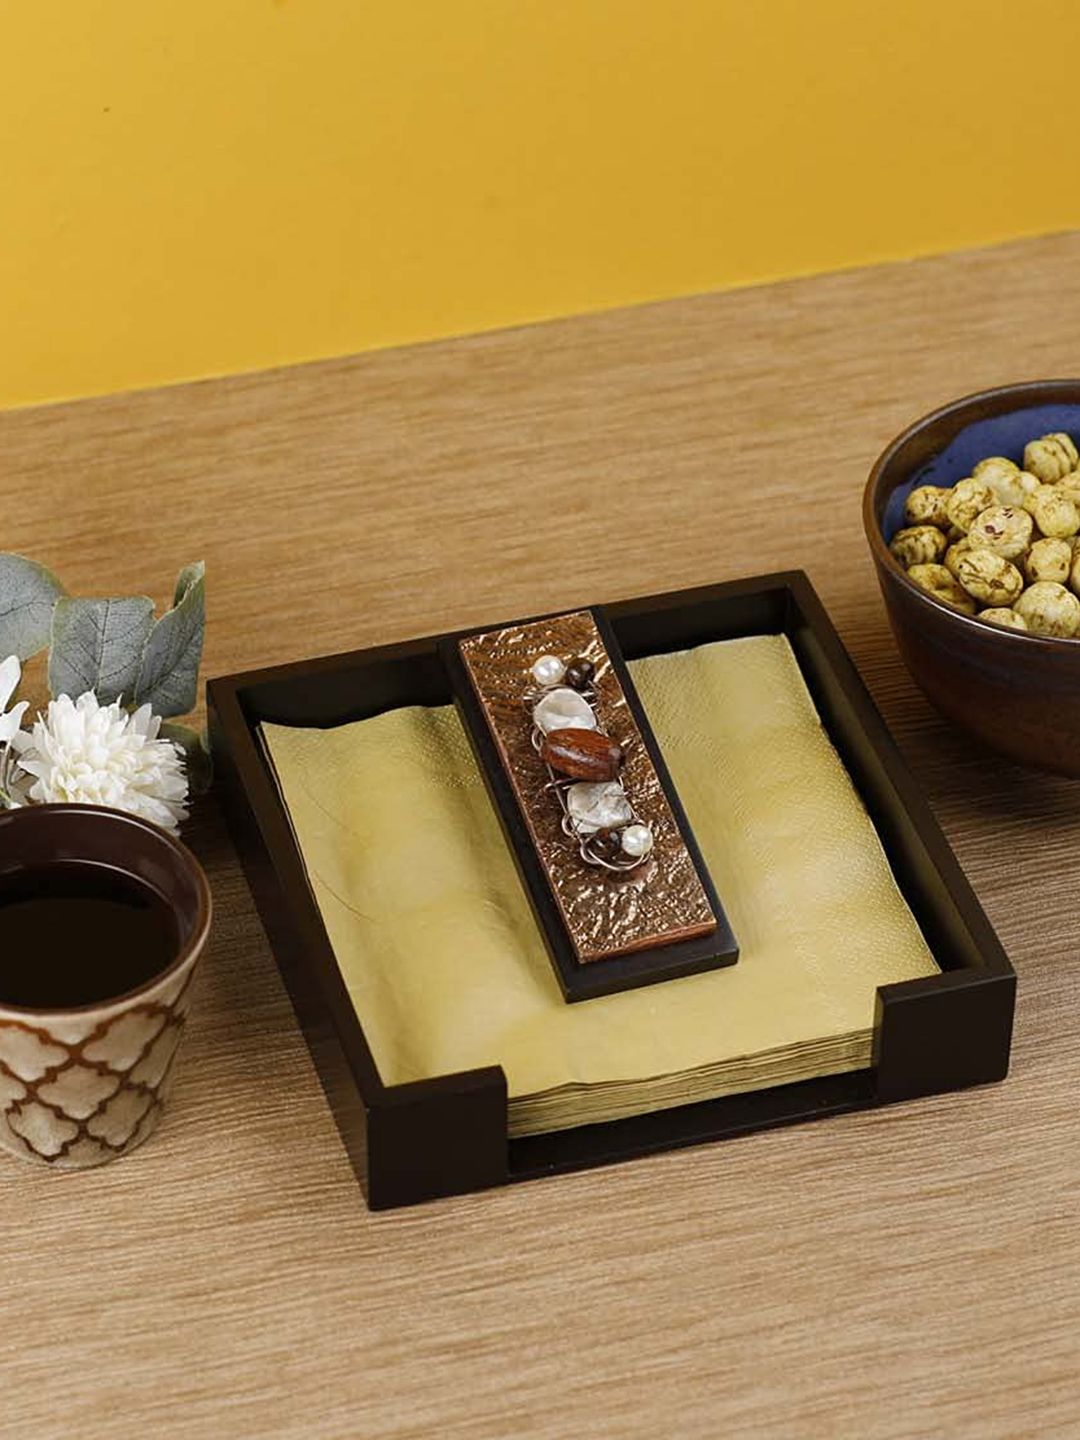 COCKTAIL Brown Solid Wooden Tissues and Napkin Holder Price in India